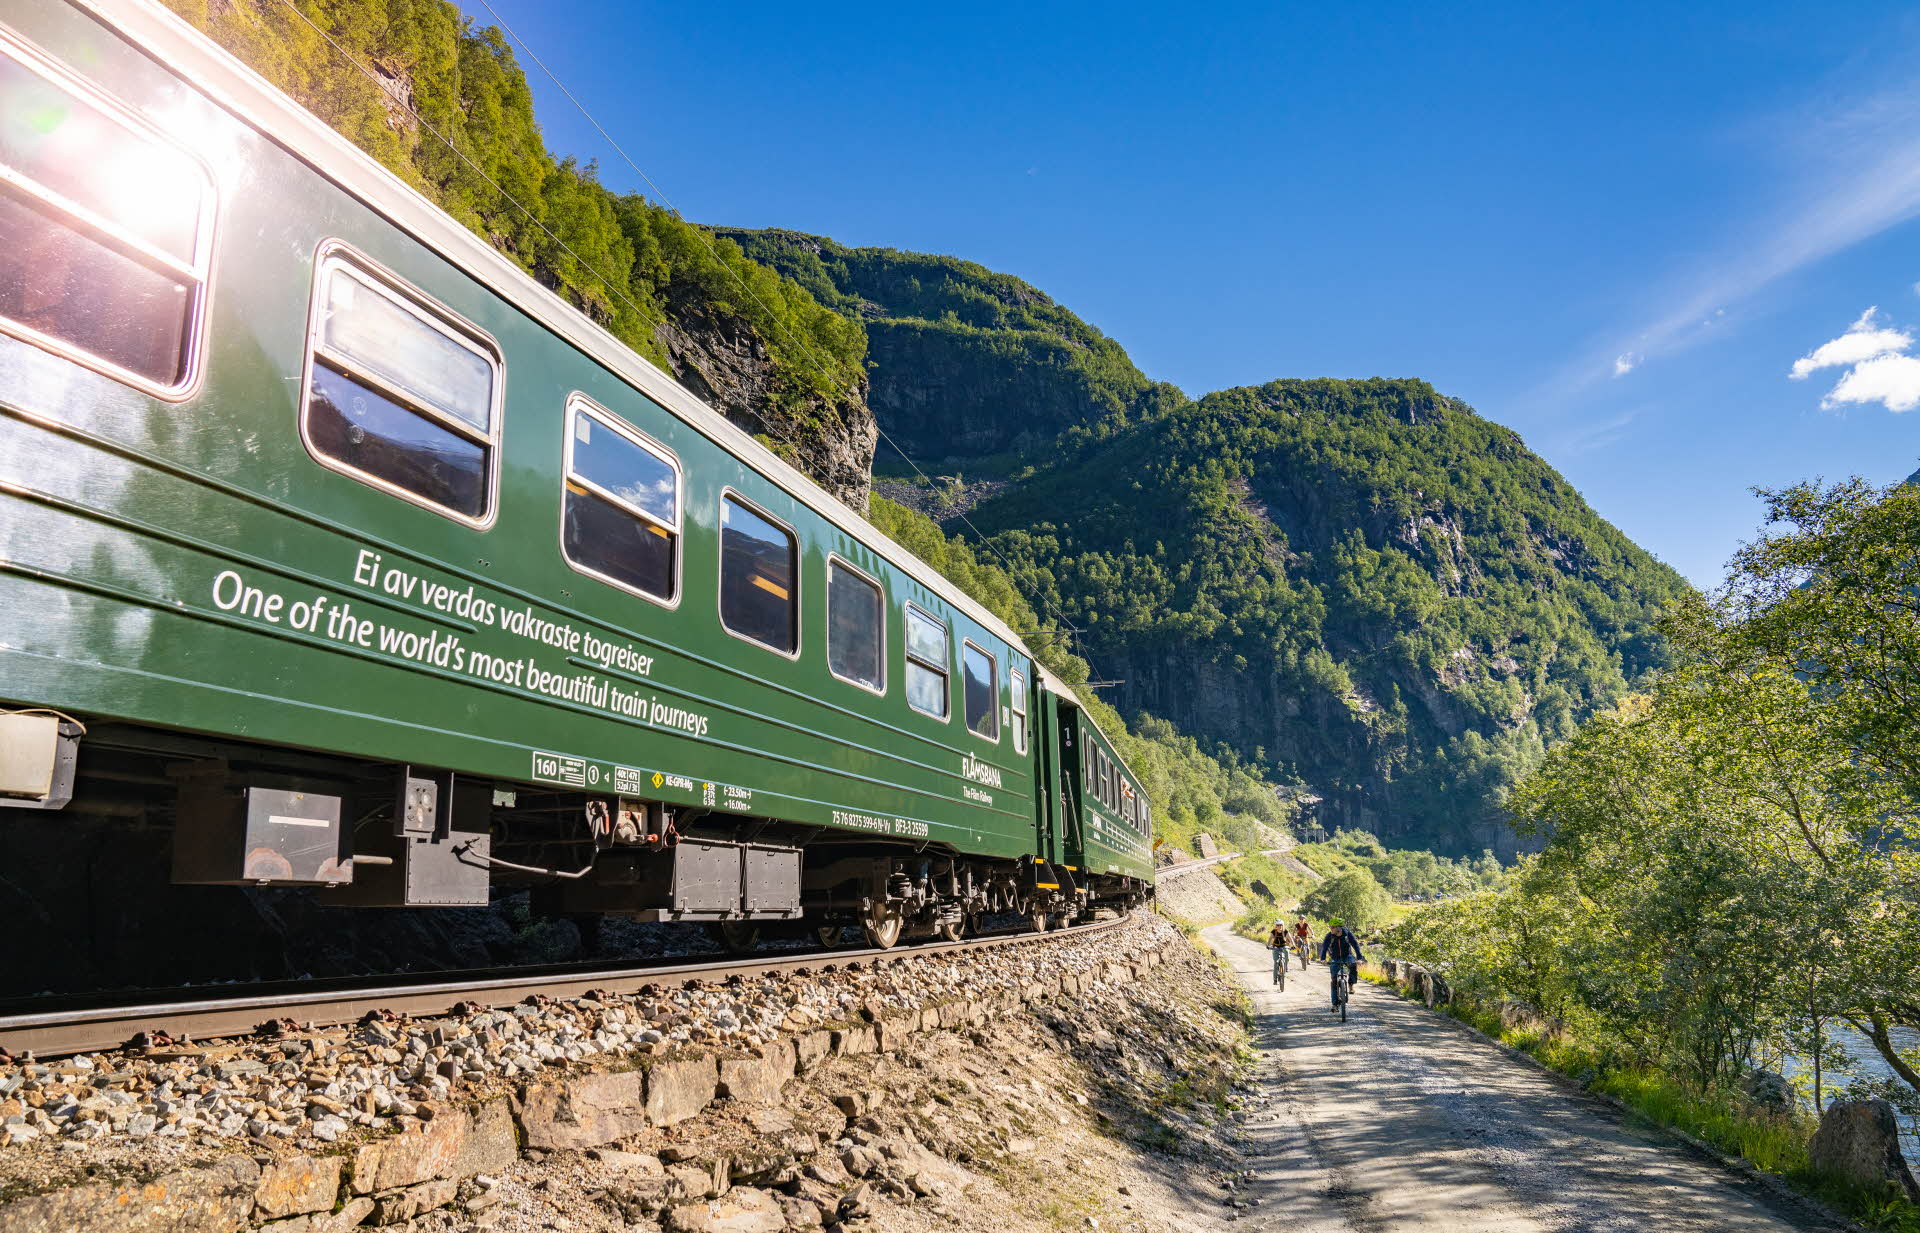 Cyclists on a gravel road next to the green Flåm Railway train. Mountains covered in forest.